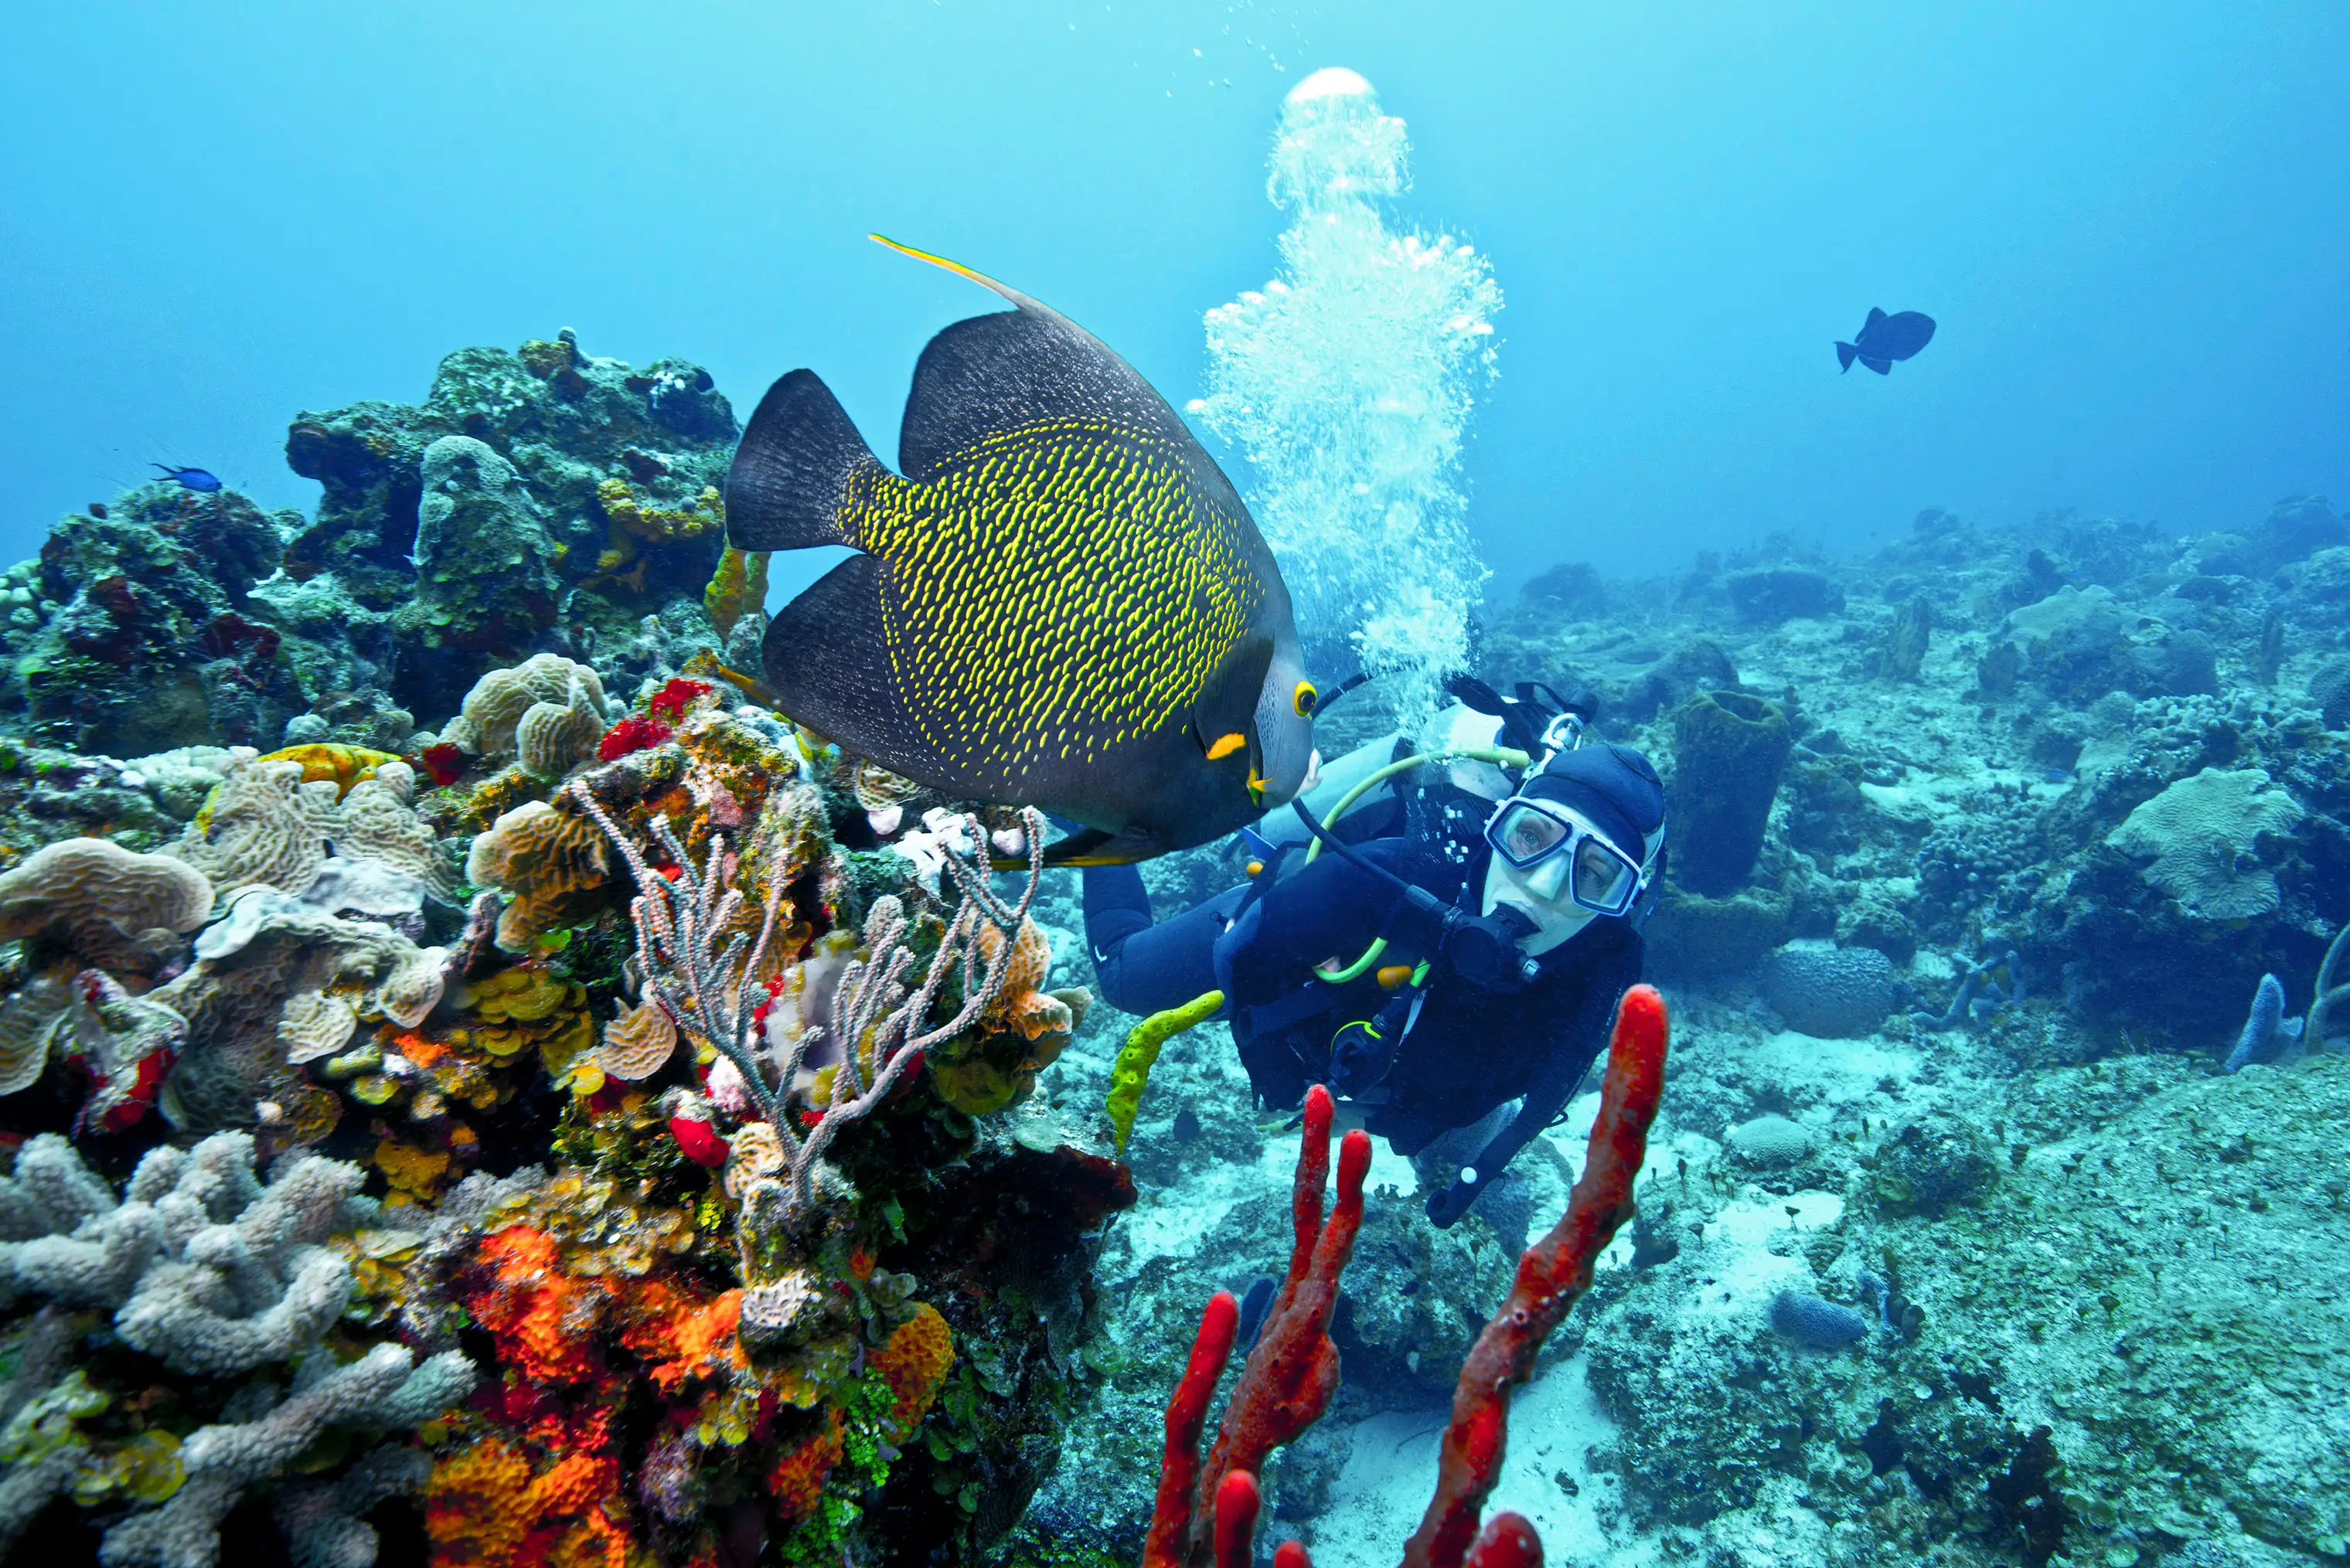 Snorkelers and divers can spot numerous sea creatures in Cozumelâ€™s waters.